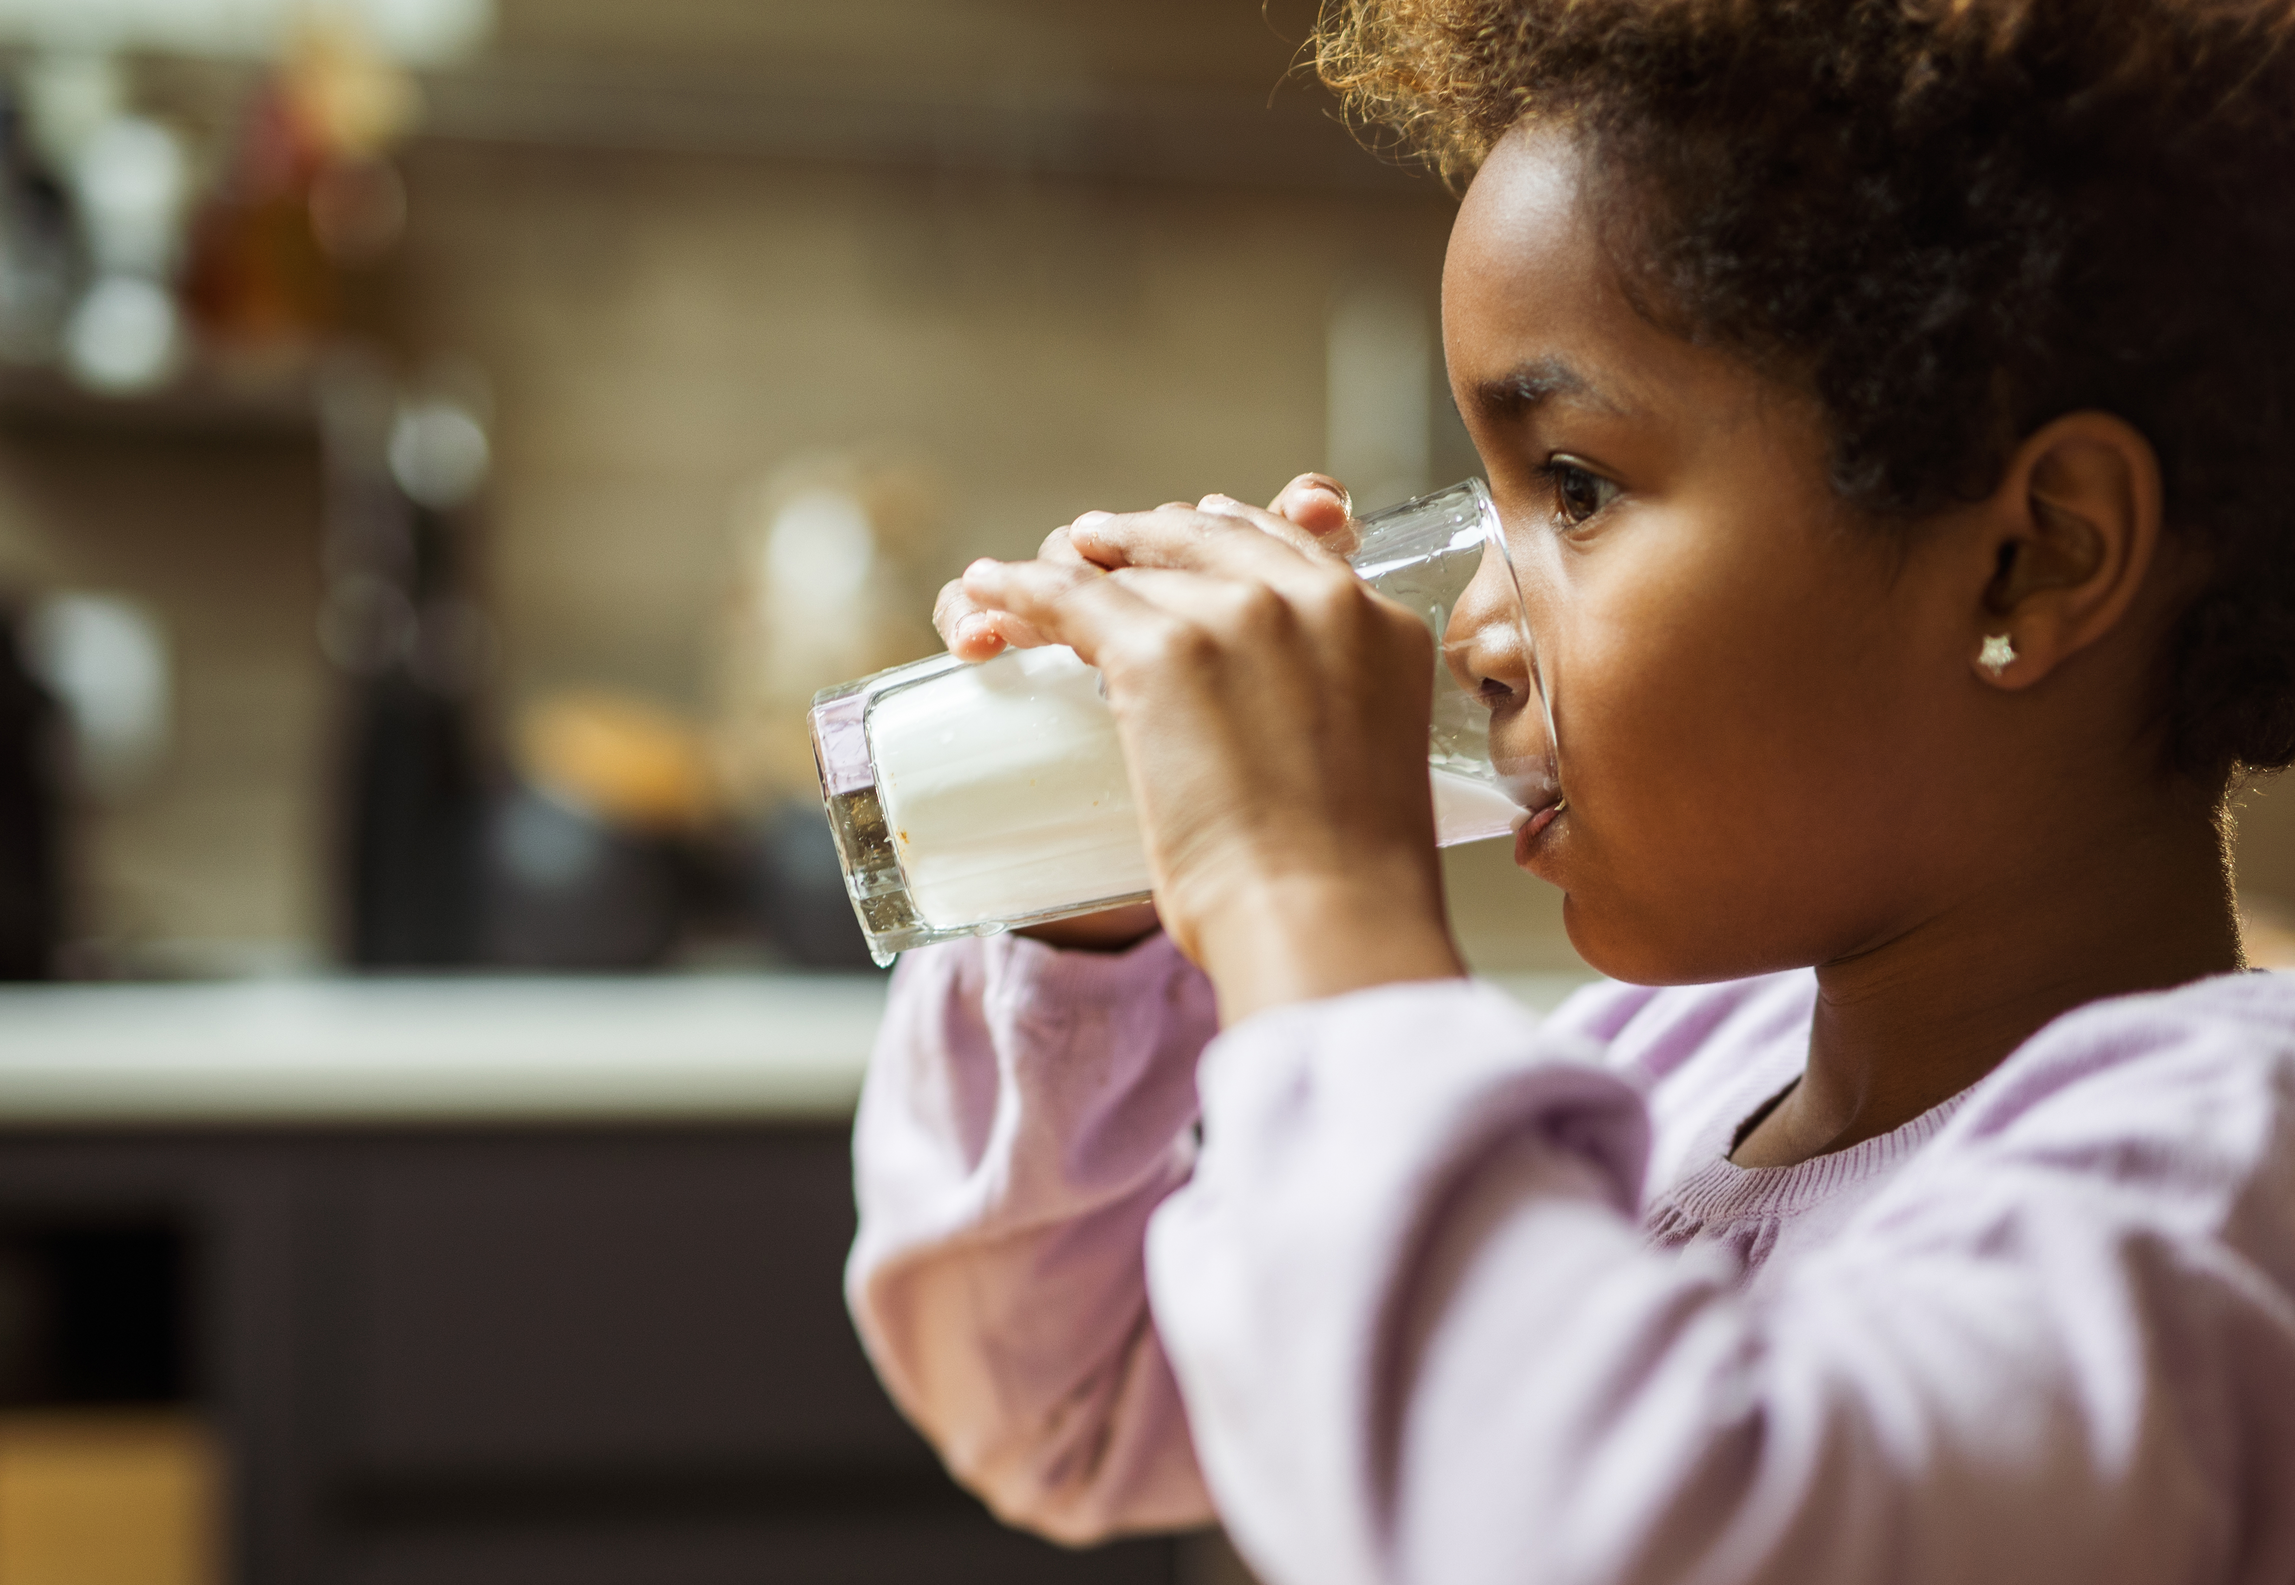 Child drinking a glass of milk